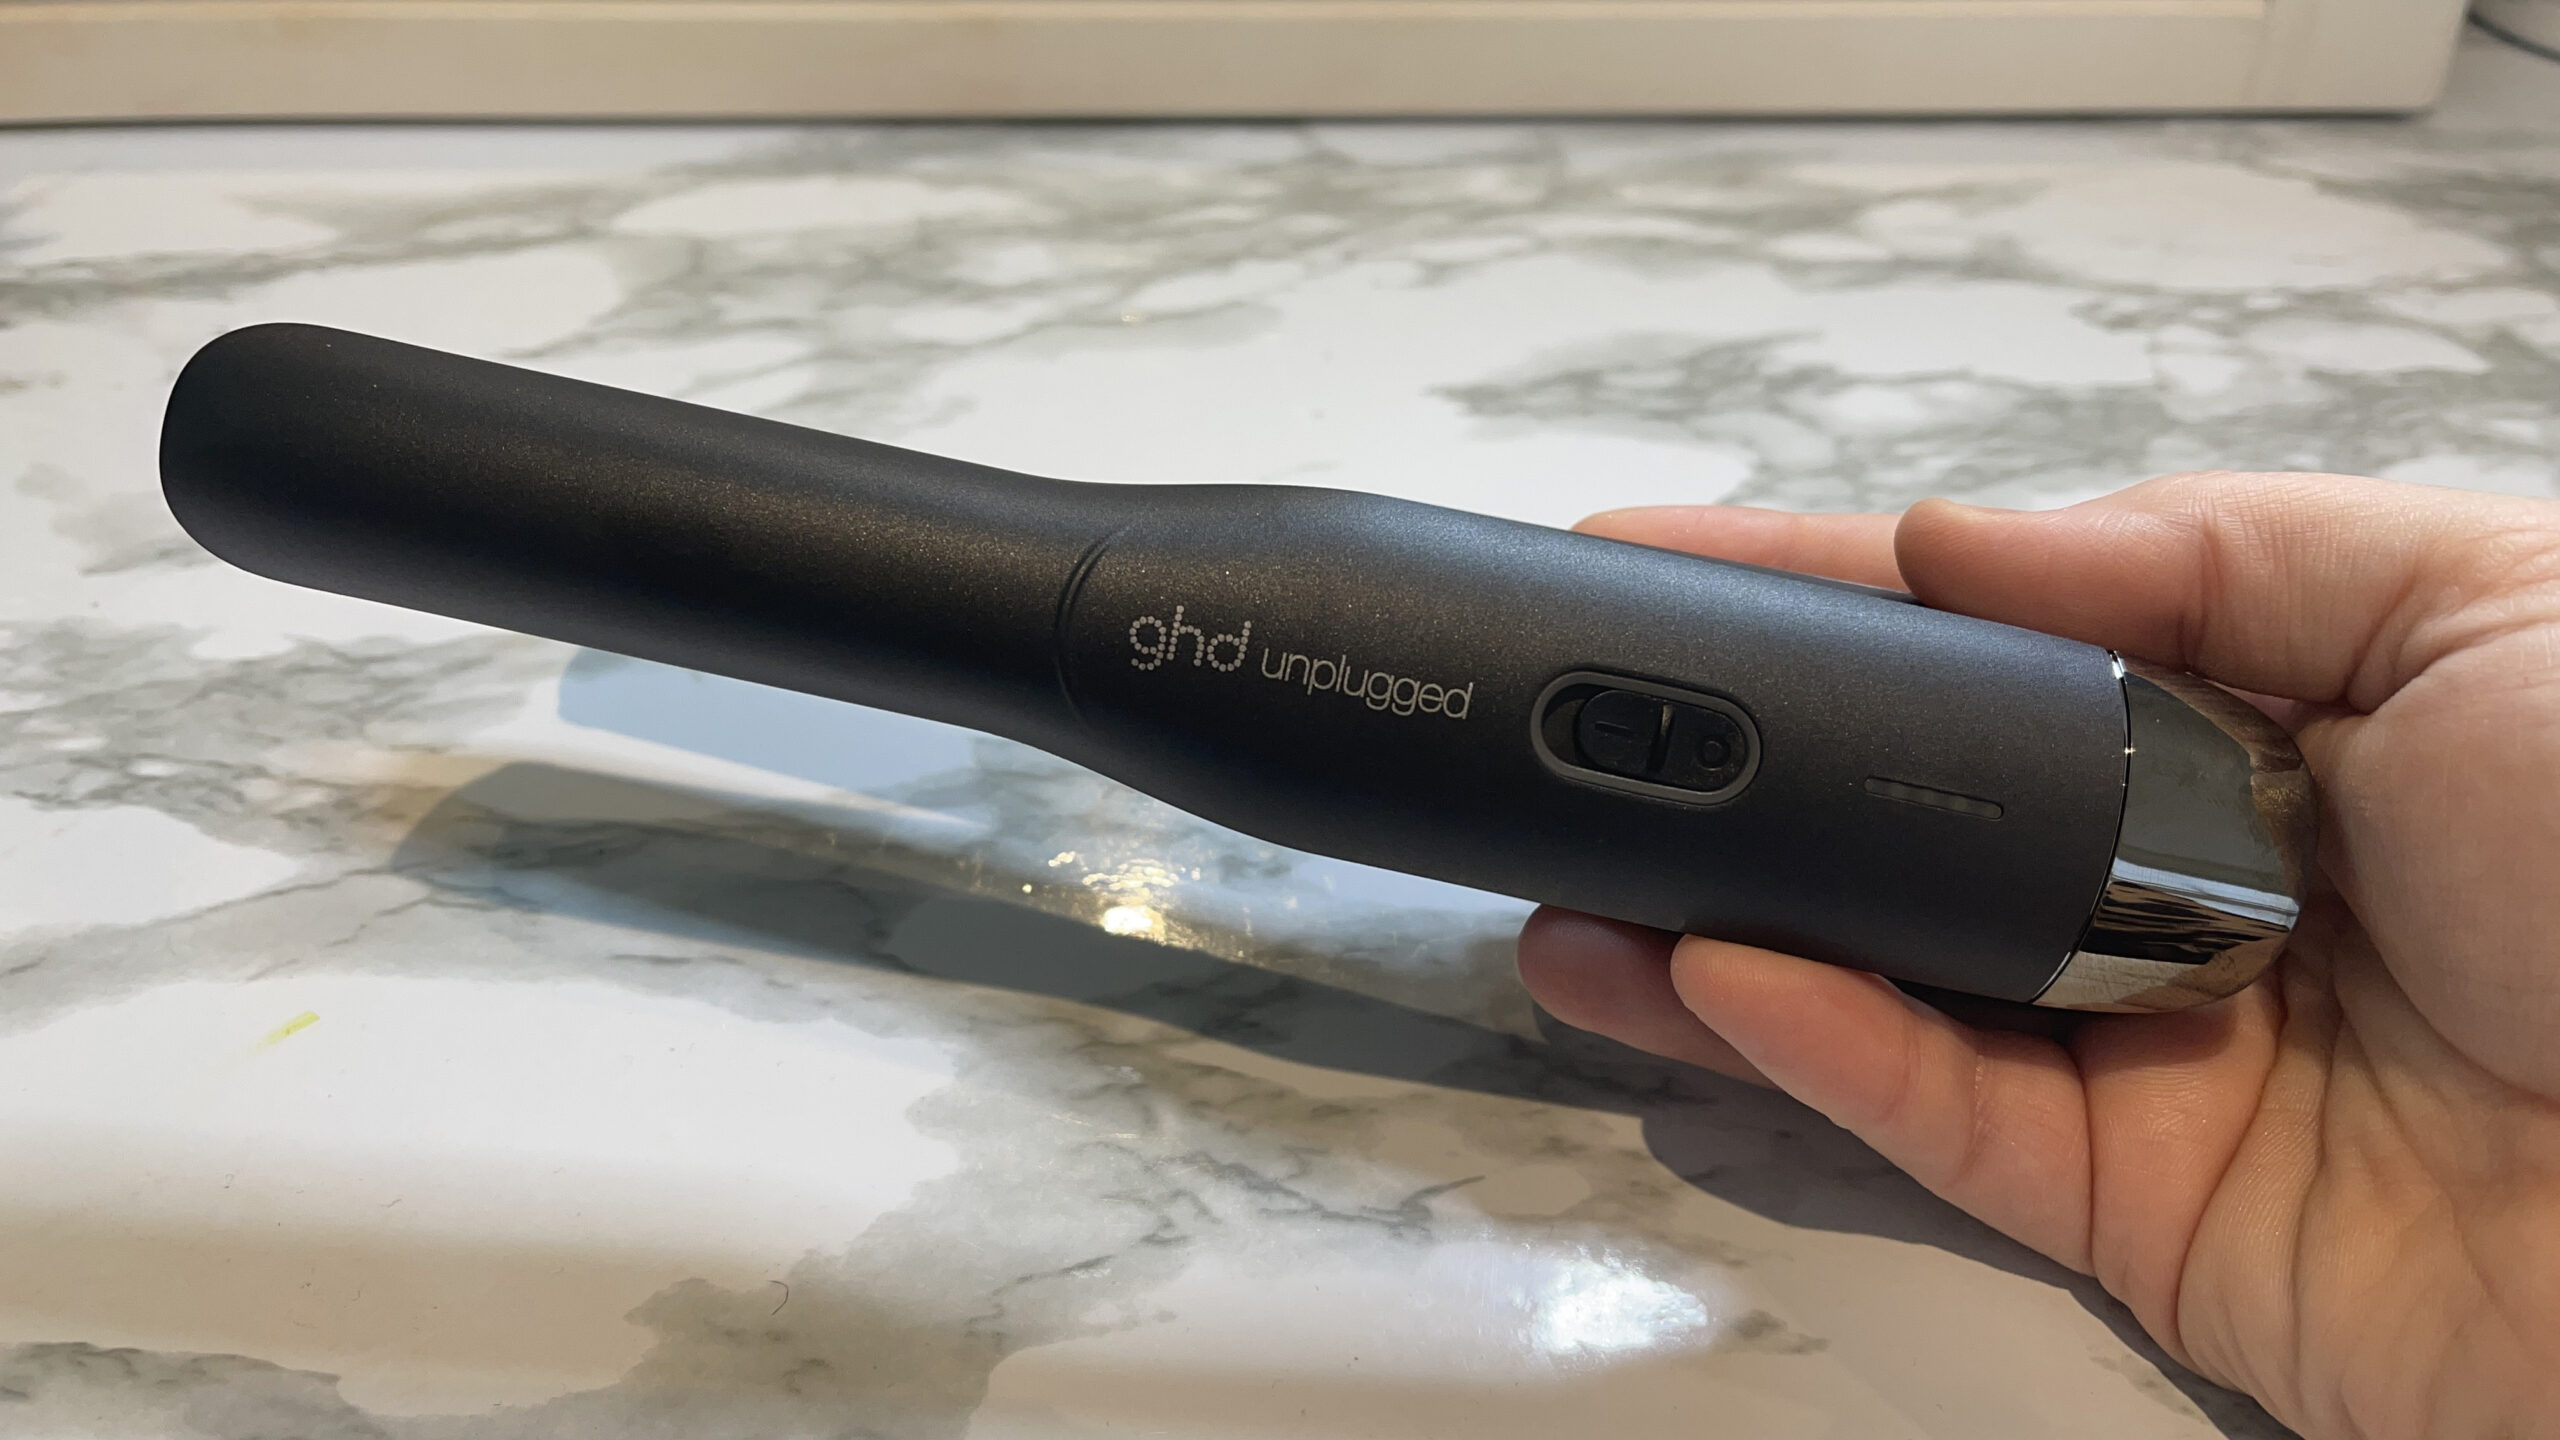 GHD Unplugged review UK